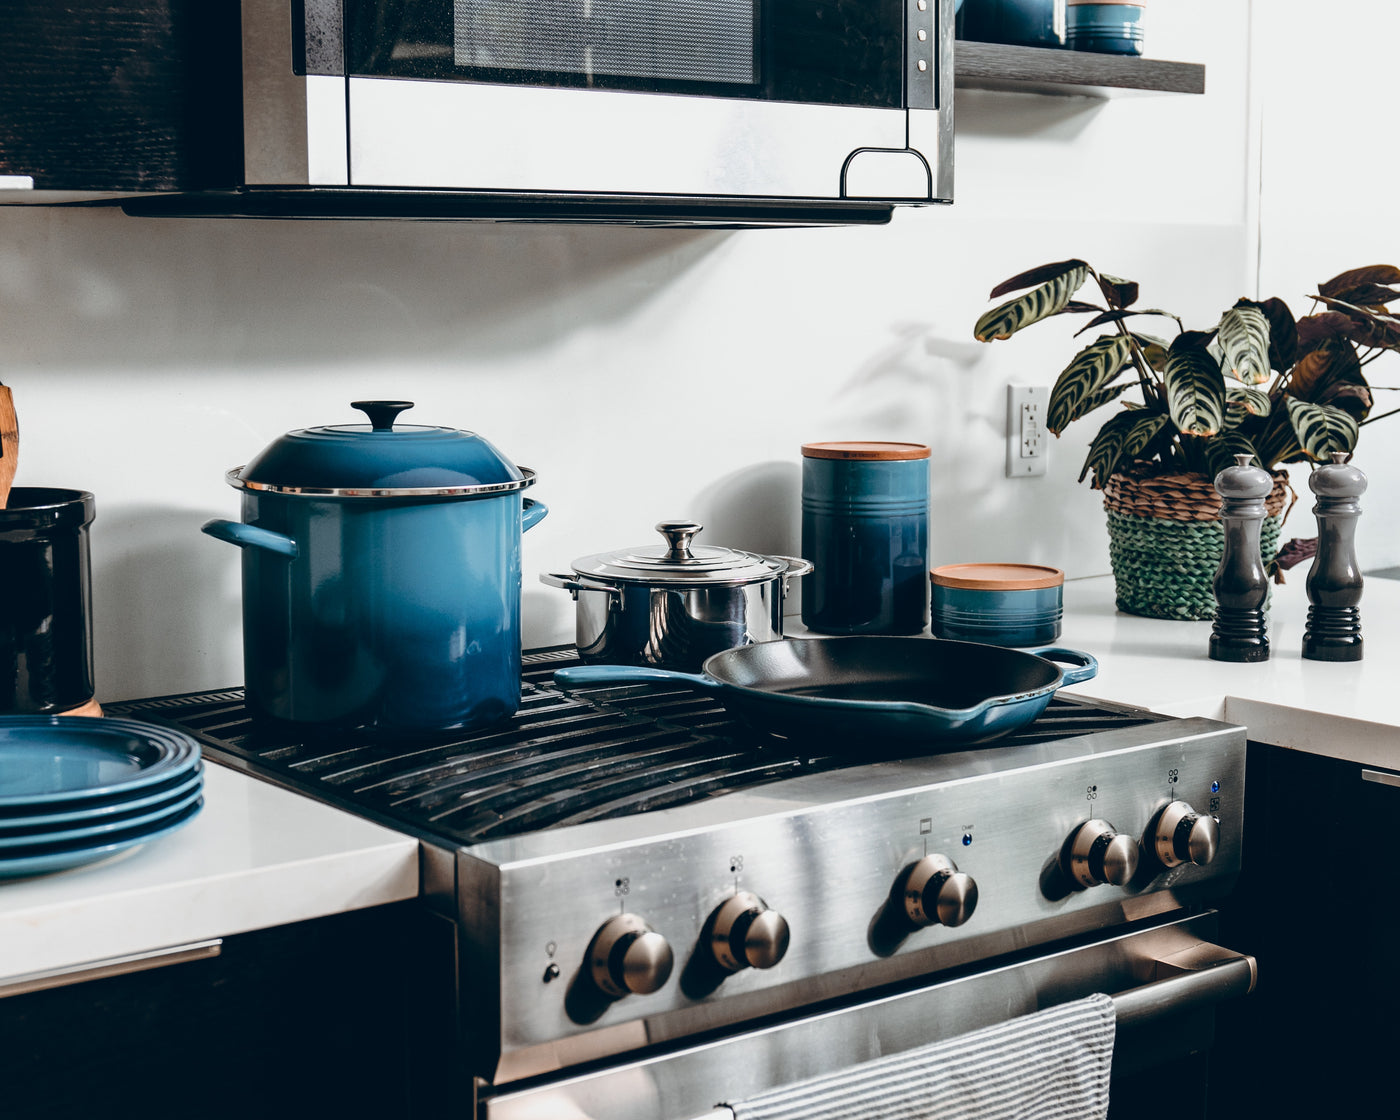 Assorted cookware Photo by Dane Deaner on Unsplash